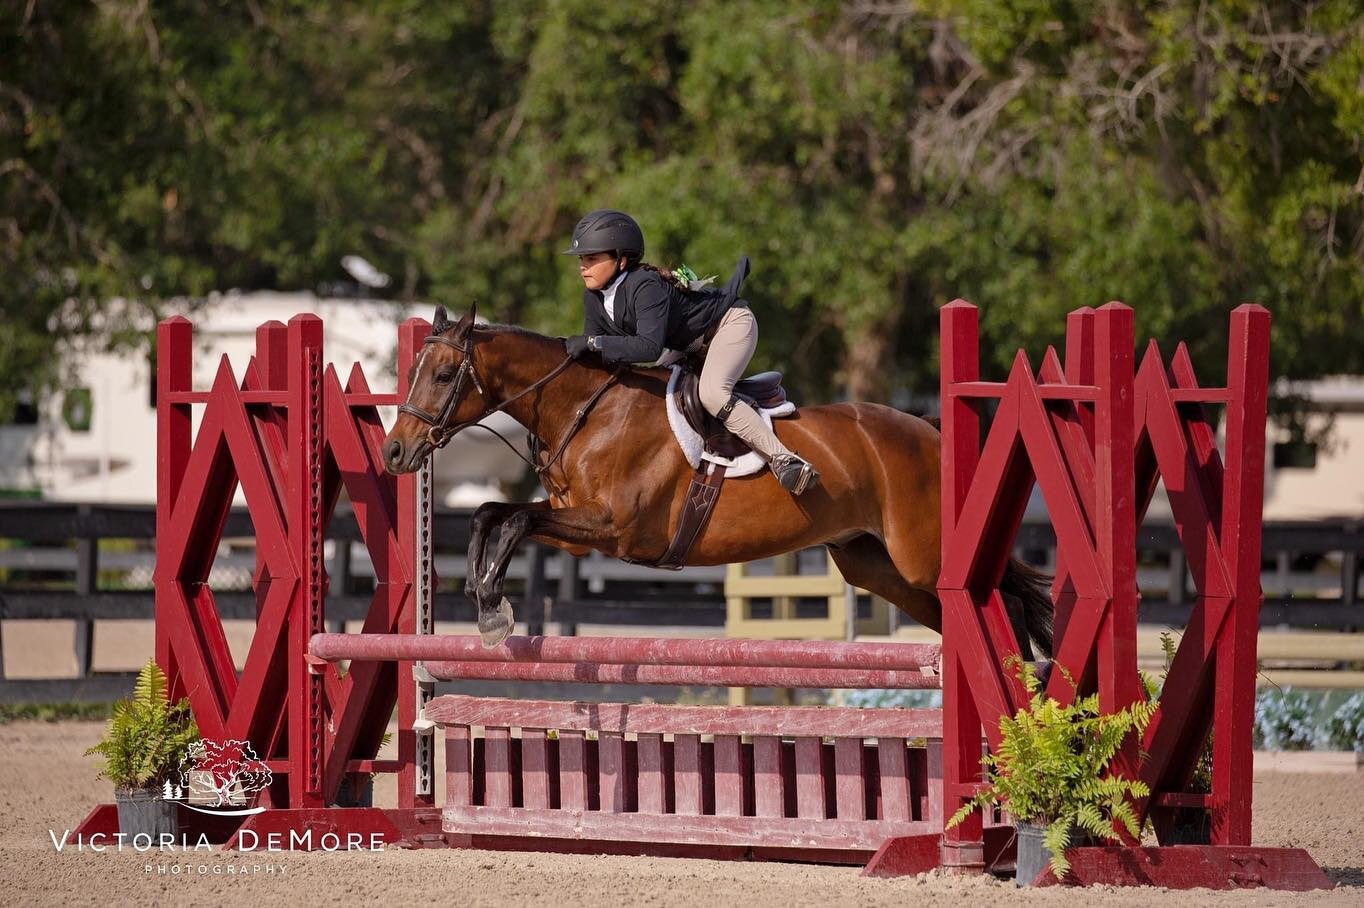 More Sunday Funday Fun! Lil Bit Better, with Siena Zorrilla in the irons, wins the $1500 Spring 2'/2'6&quot; Hunter Derby sponsored by Belt It Out Goods. Great job Siena!

📷: Victoria DeMore Photography